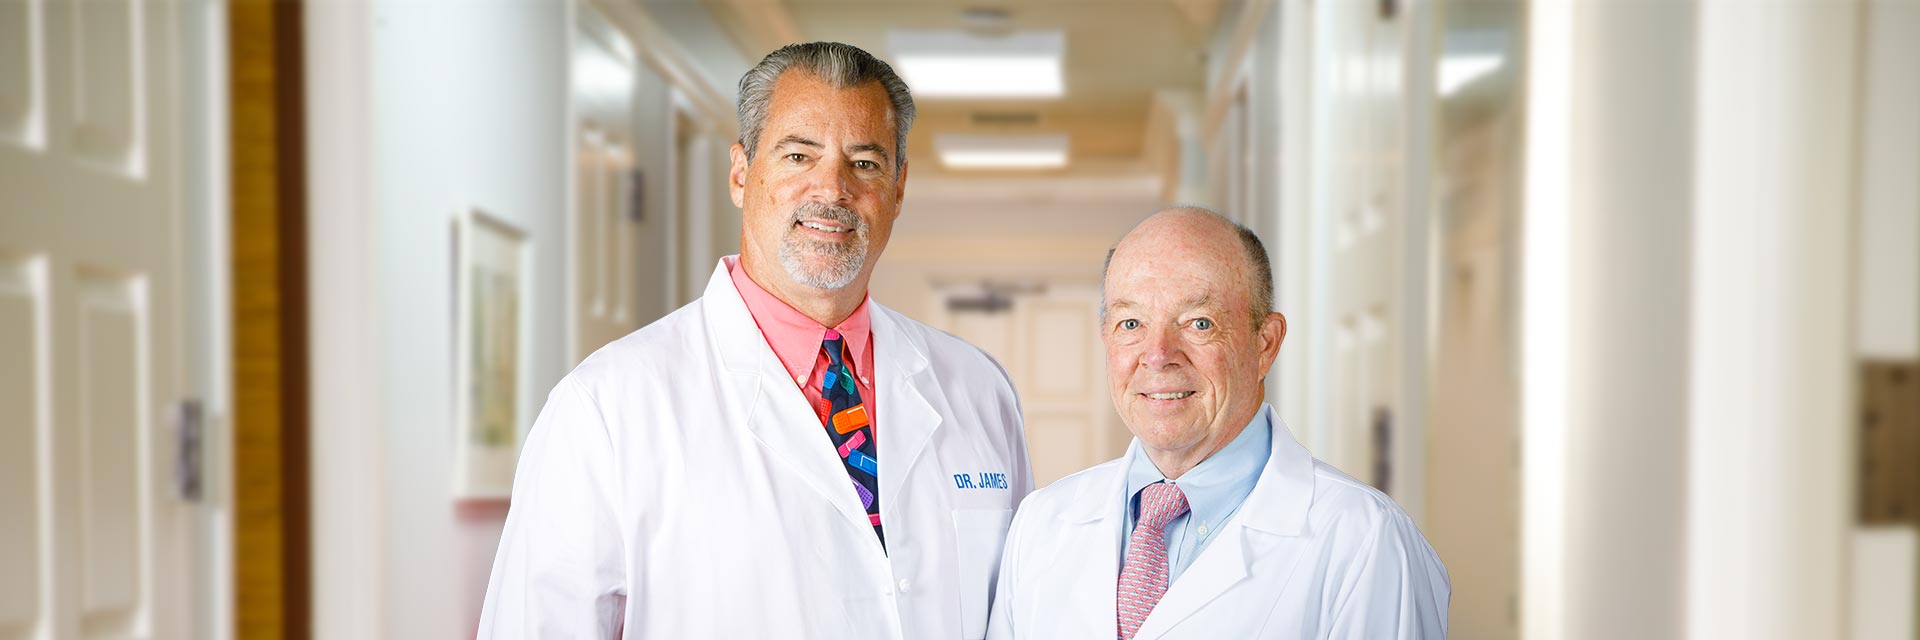 Dr. Raymond A. James and Dr. Thomas J. Ervin.